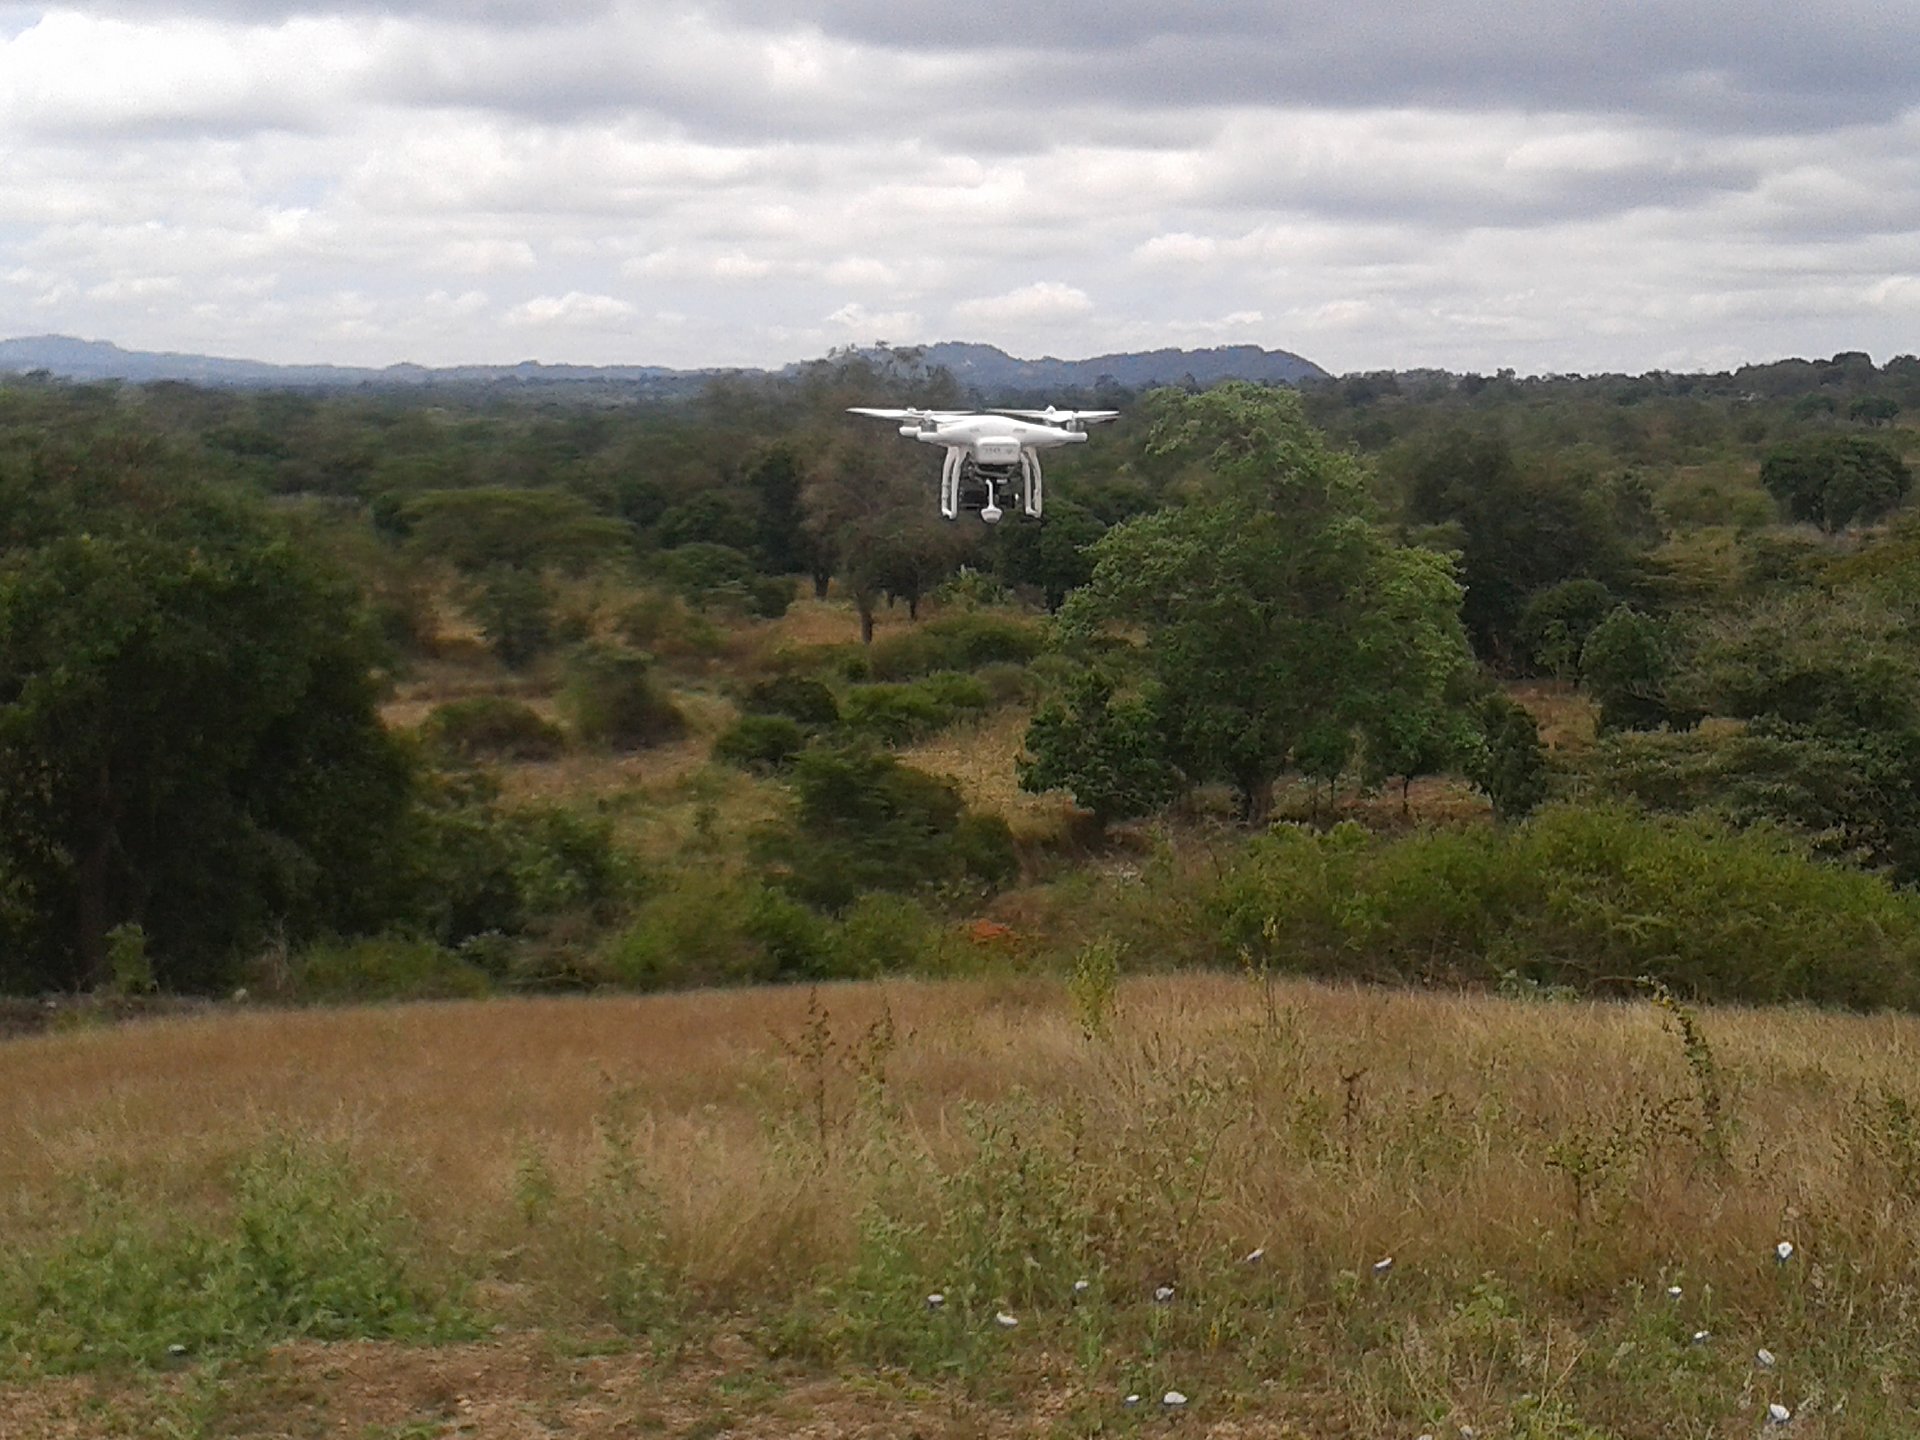 This is a drone as it was used by scientist Jan C. Habel – here the drone is flying across an agrarian used area in Kenya. (Photo: J. C. Habel/ TUM)